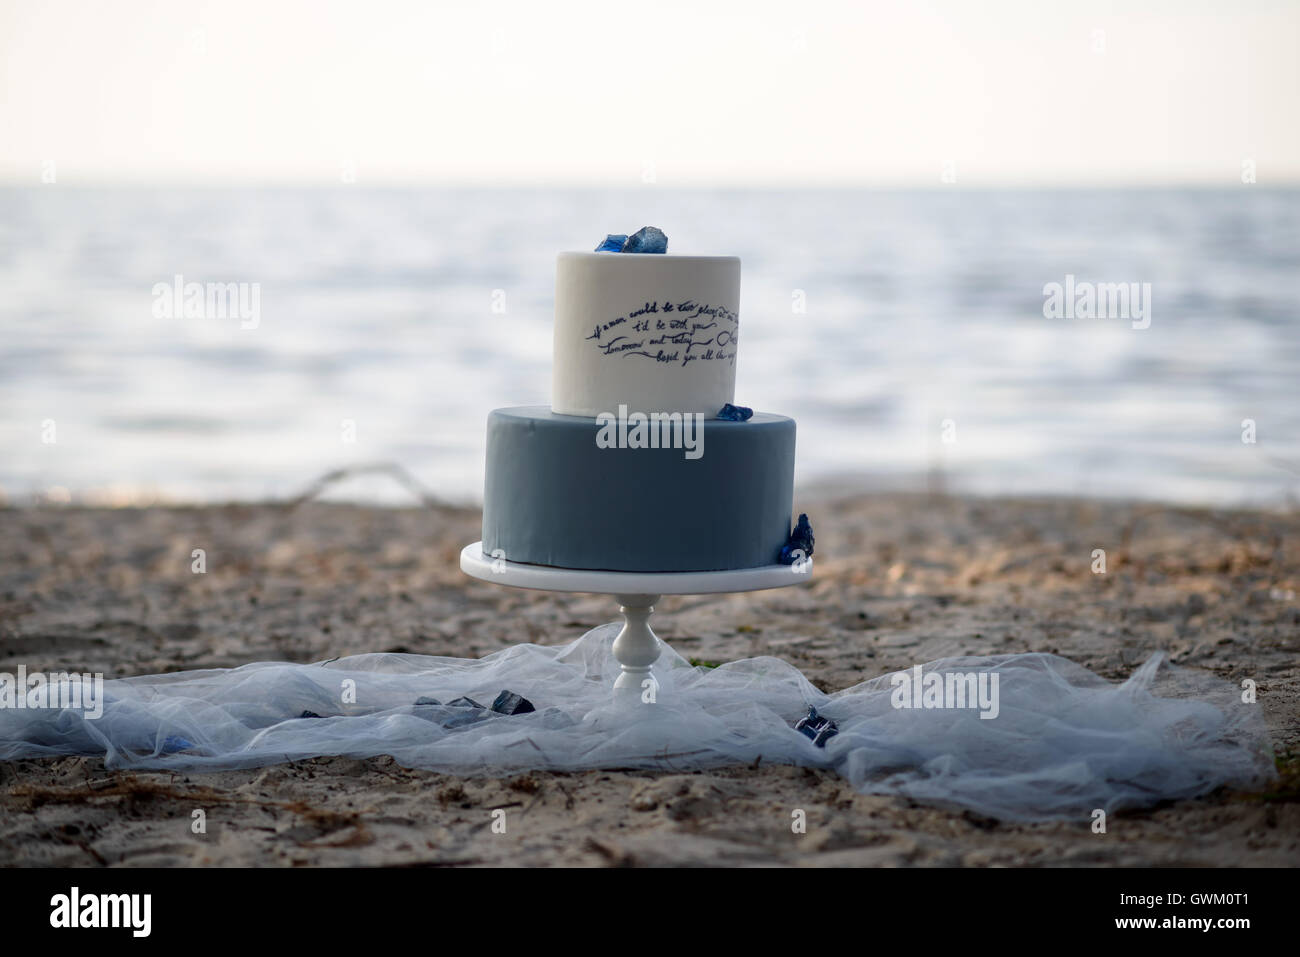 Blue two-tiered wedding cake on a sandy beach, decorated with blue stones. Wedding cake on the sand at sunset Stock Photo